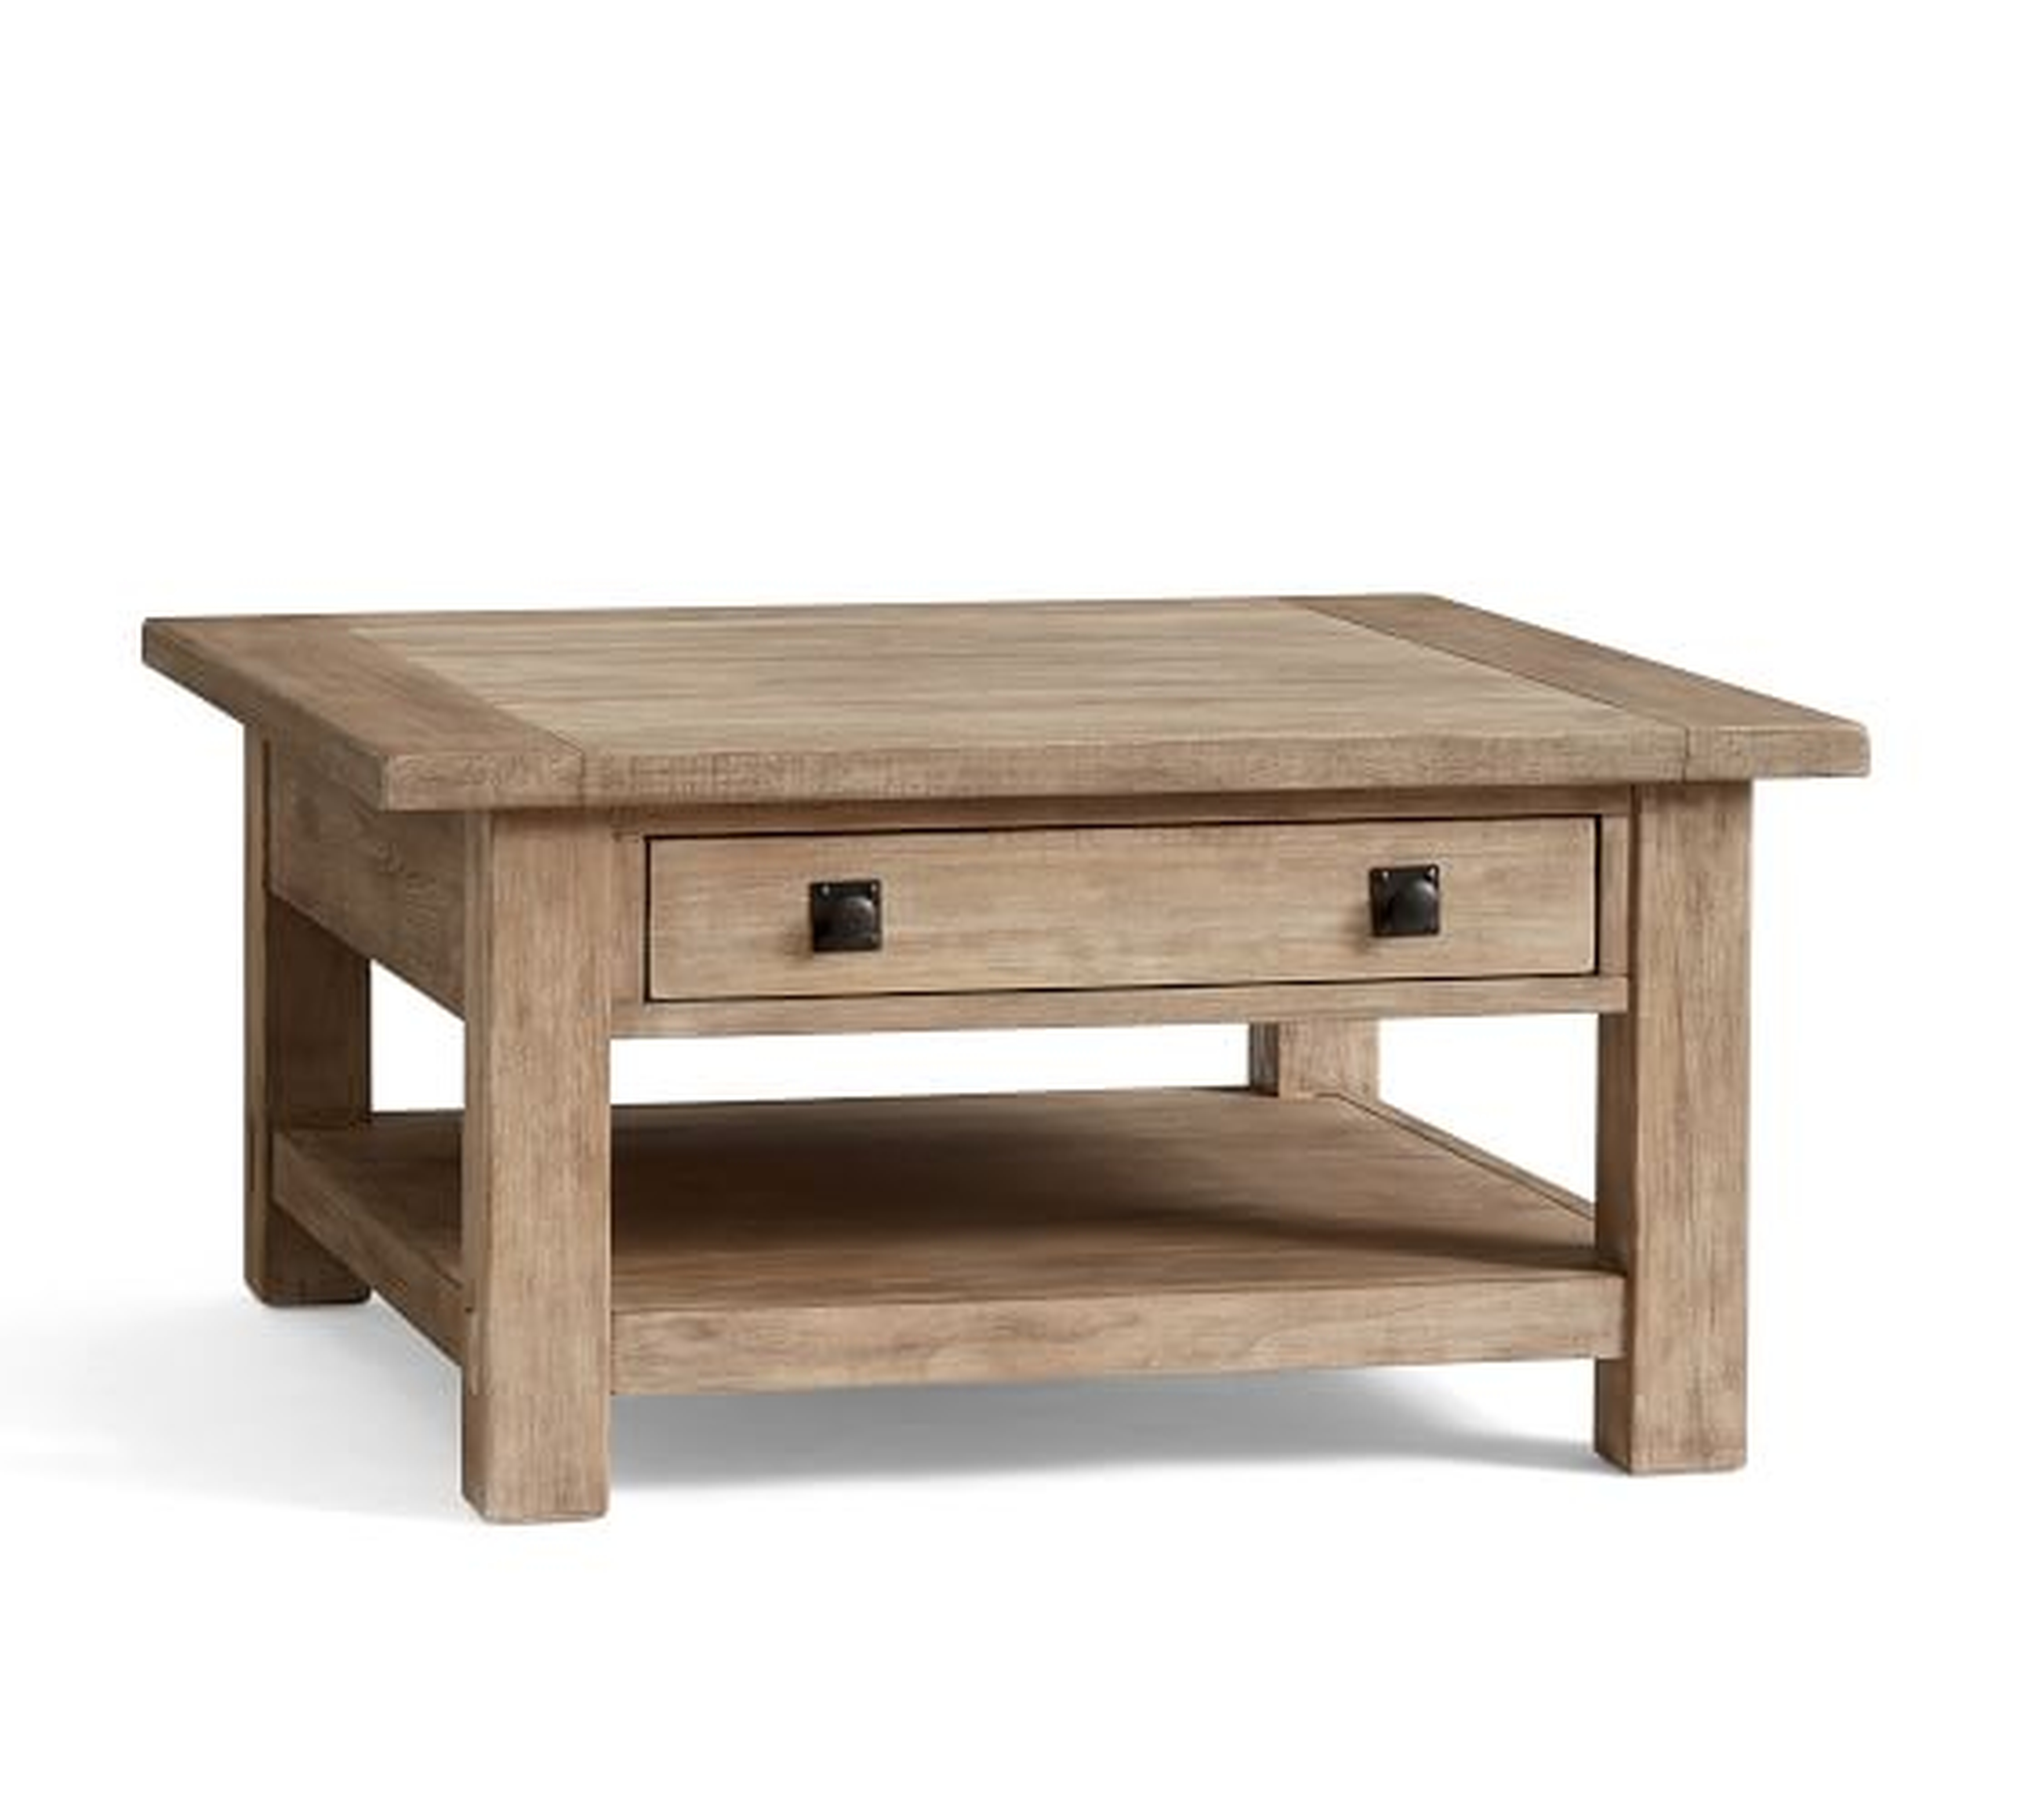 Benchwright Square Coffee Table, Seadrift - Pottery Barn